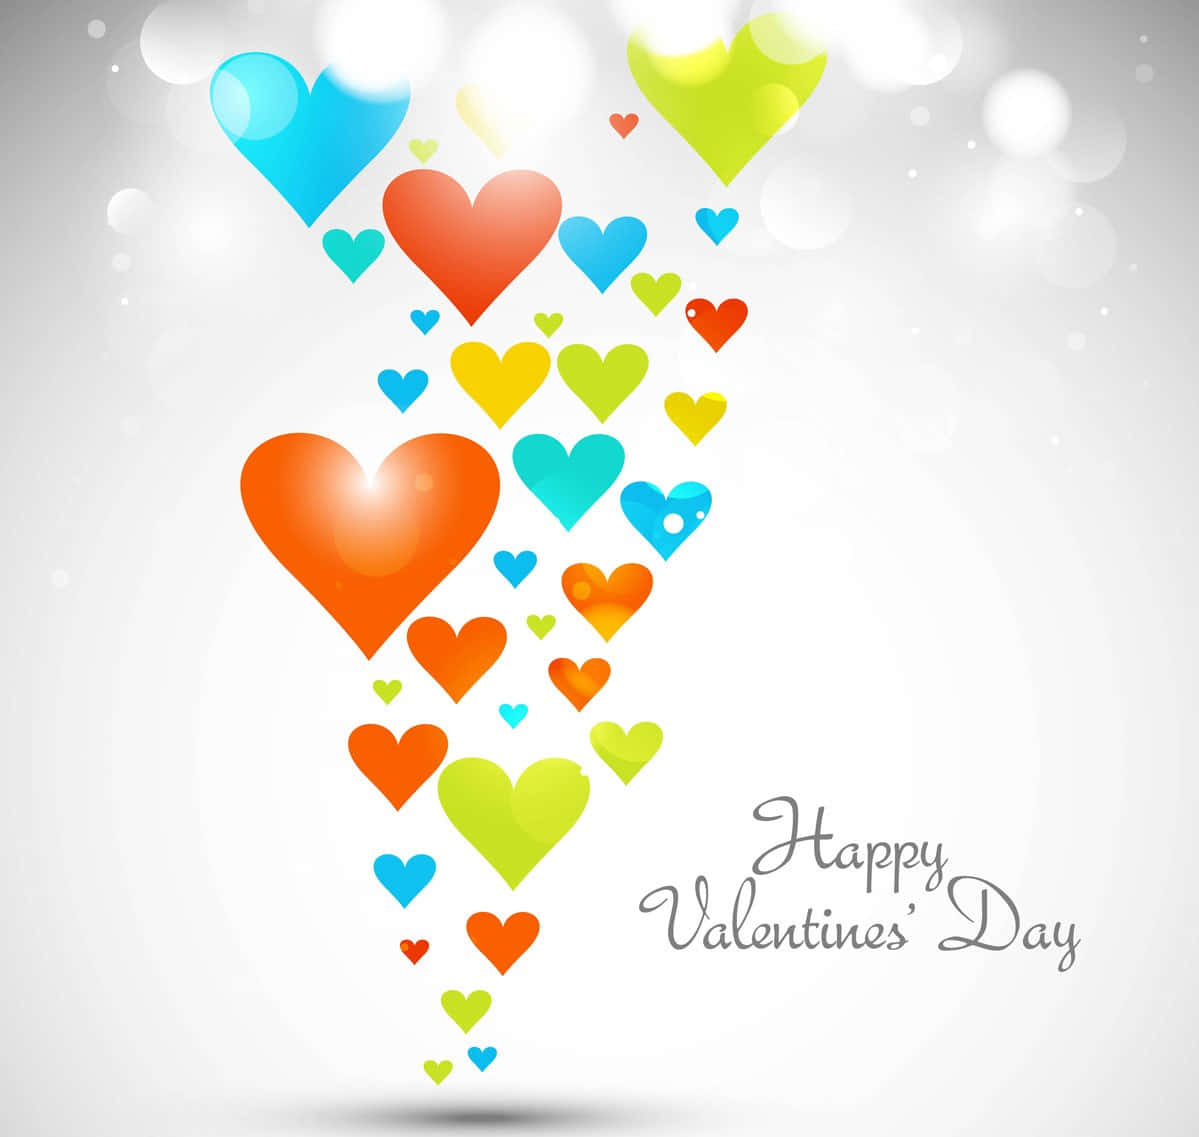 Multicolored Cute Valentines Day Greeting Digital Illustration Background